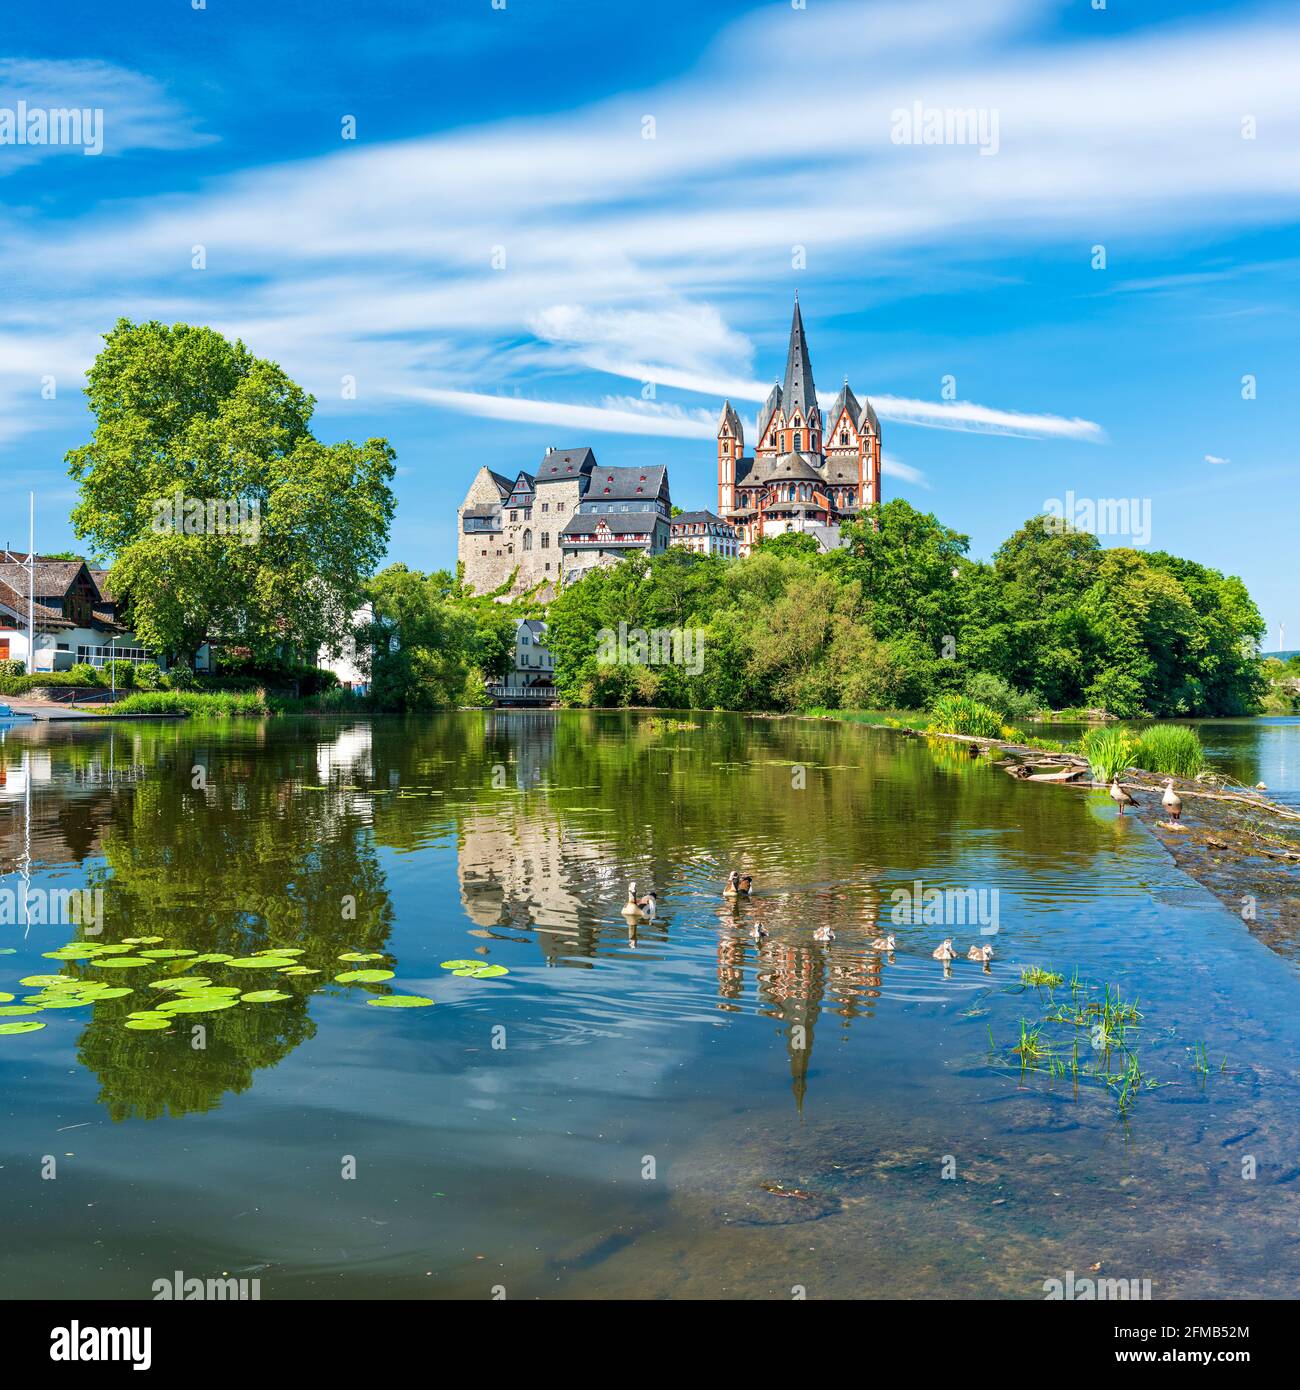 Germany, Hesse, Limburg an der Lahn, Limburger Dom St. Georg or Georgsdom and Limburg Castle, also Limburg Castle over the river Lahn, water reflection and Egyptian geese Stock Photo